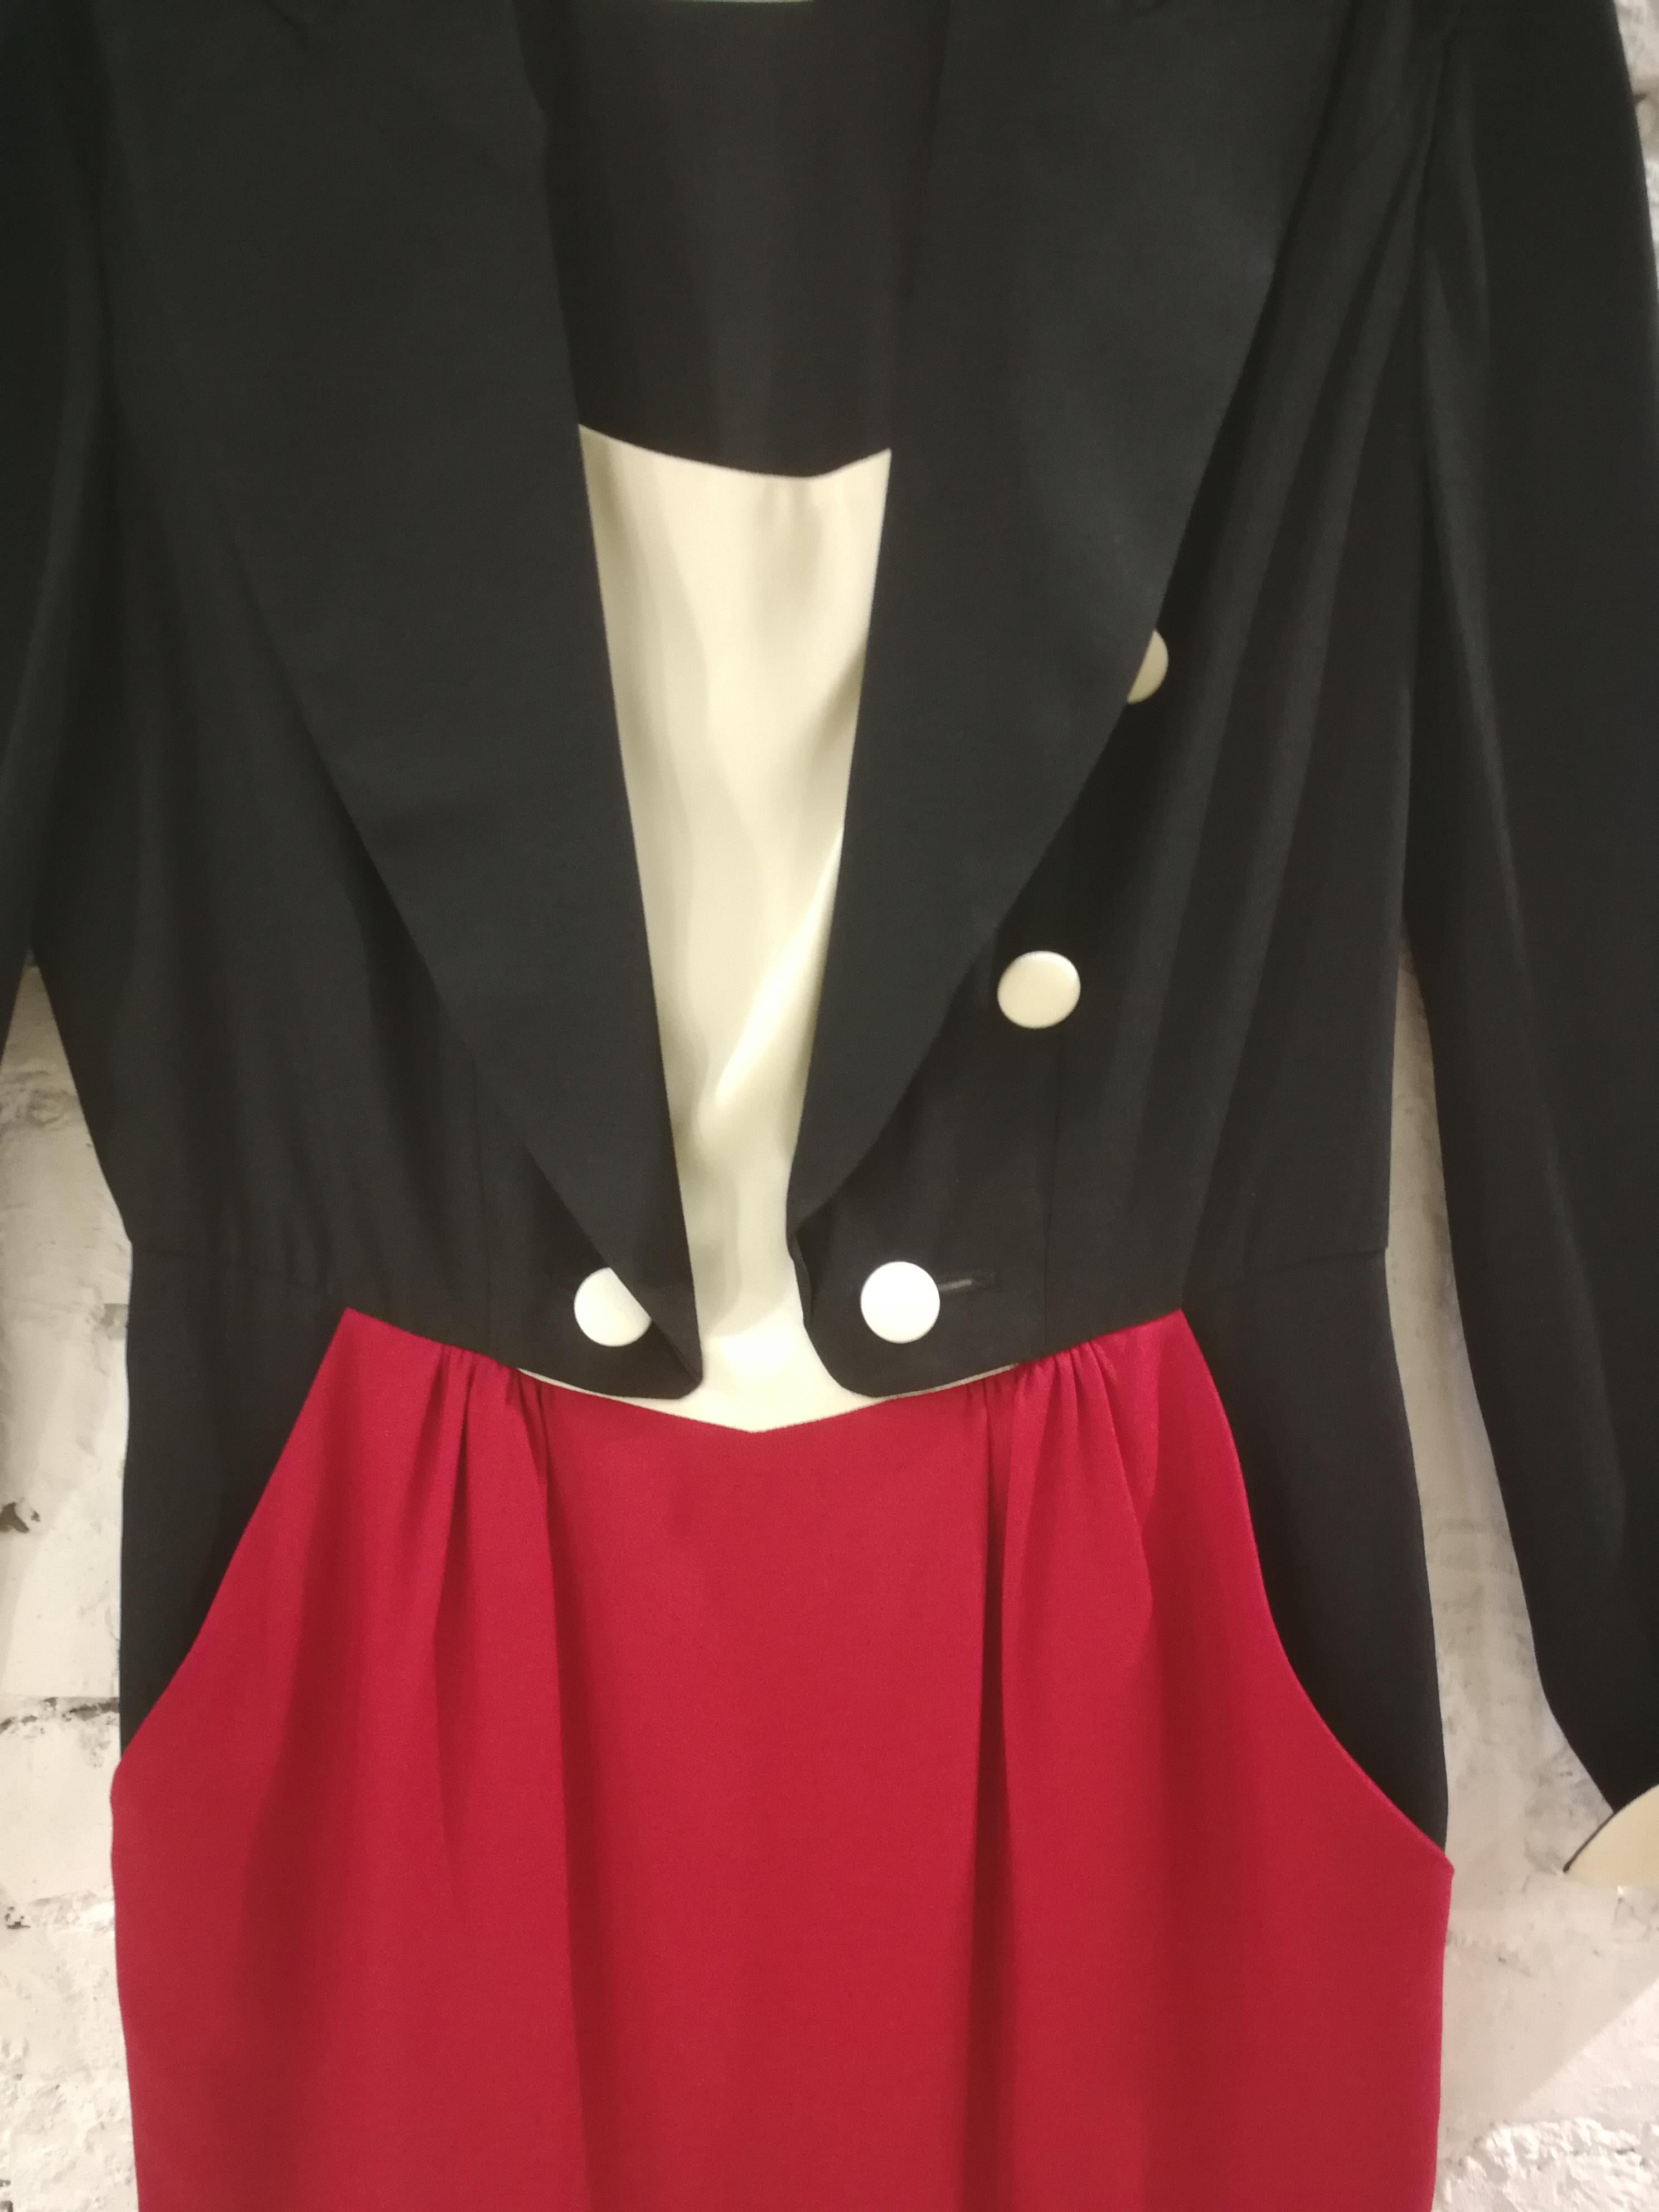 Moschino Cheap & Chic Black White Red Dress For Sale 10